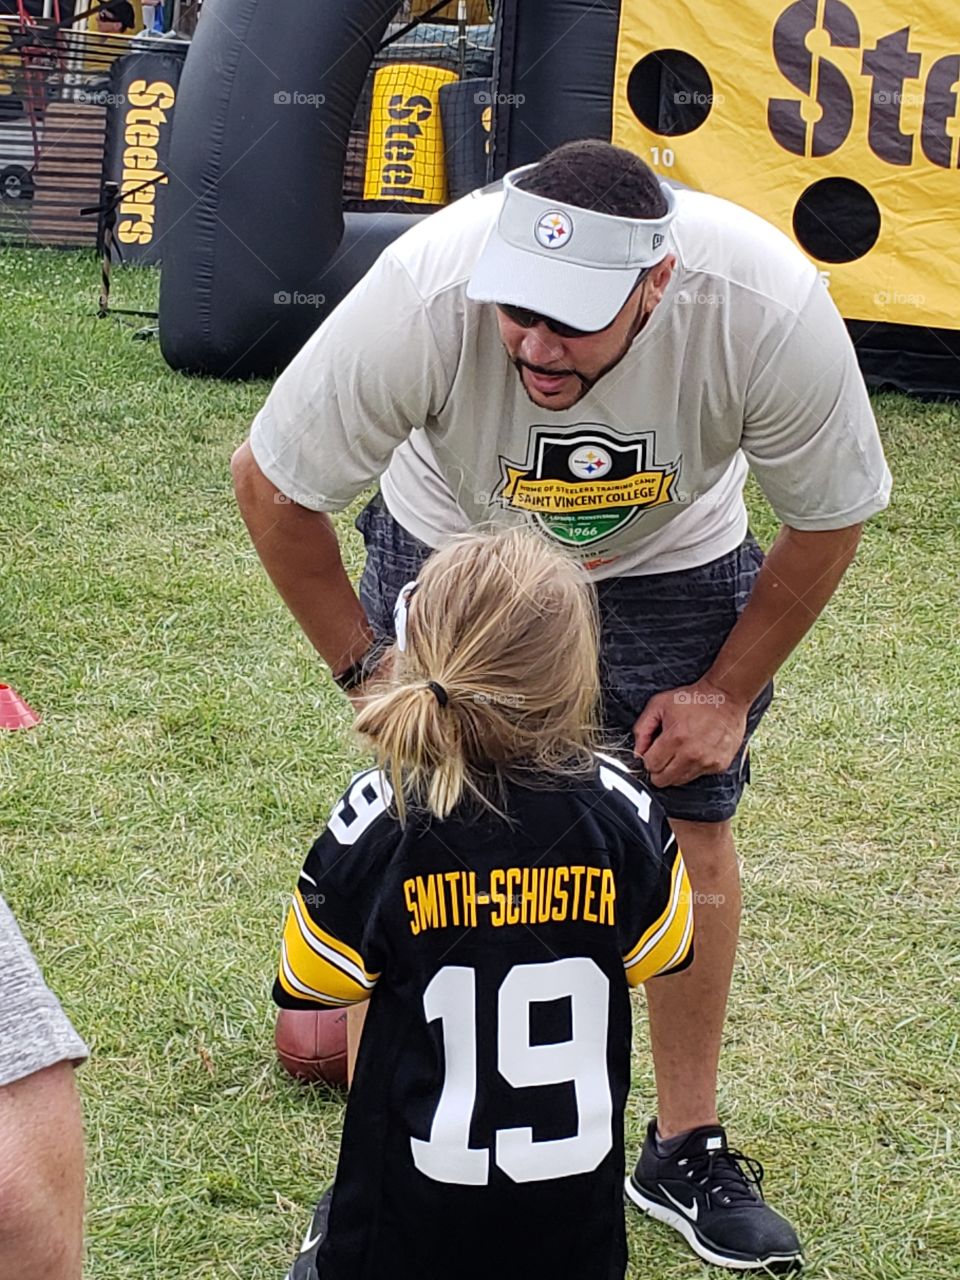 Little girl/Pittsburgh Steelers fan coaching former NFL quarterback Charlie Batch. You're never too young to give a man instructions on how to do something better. 😊